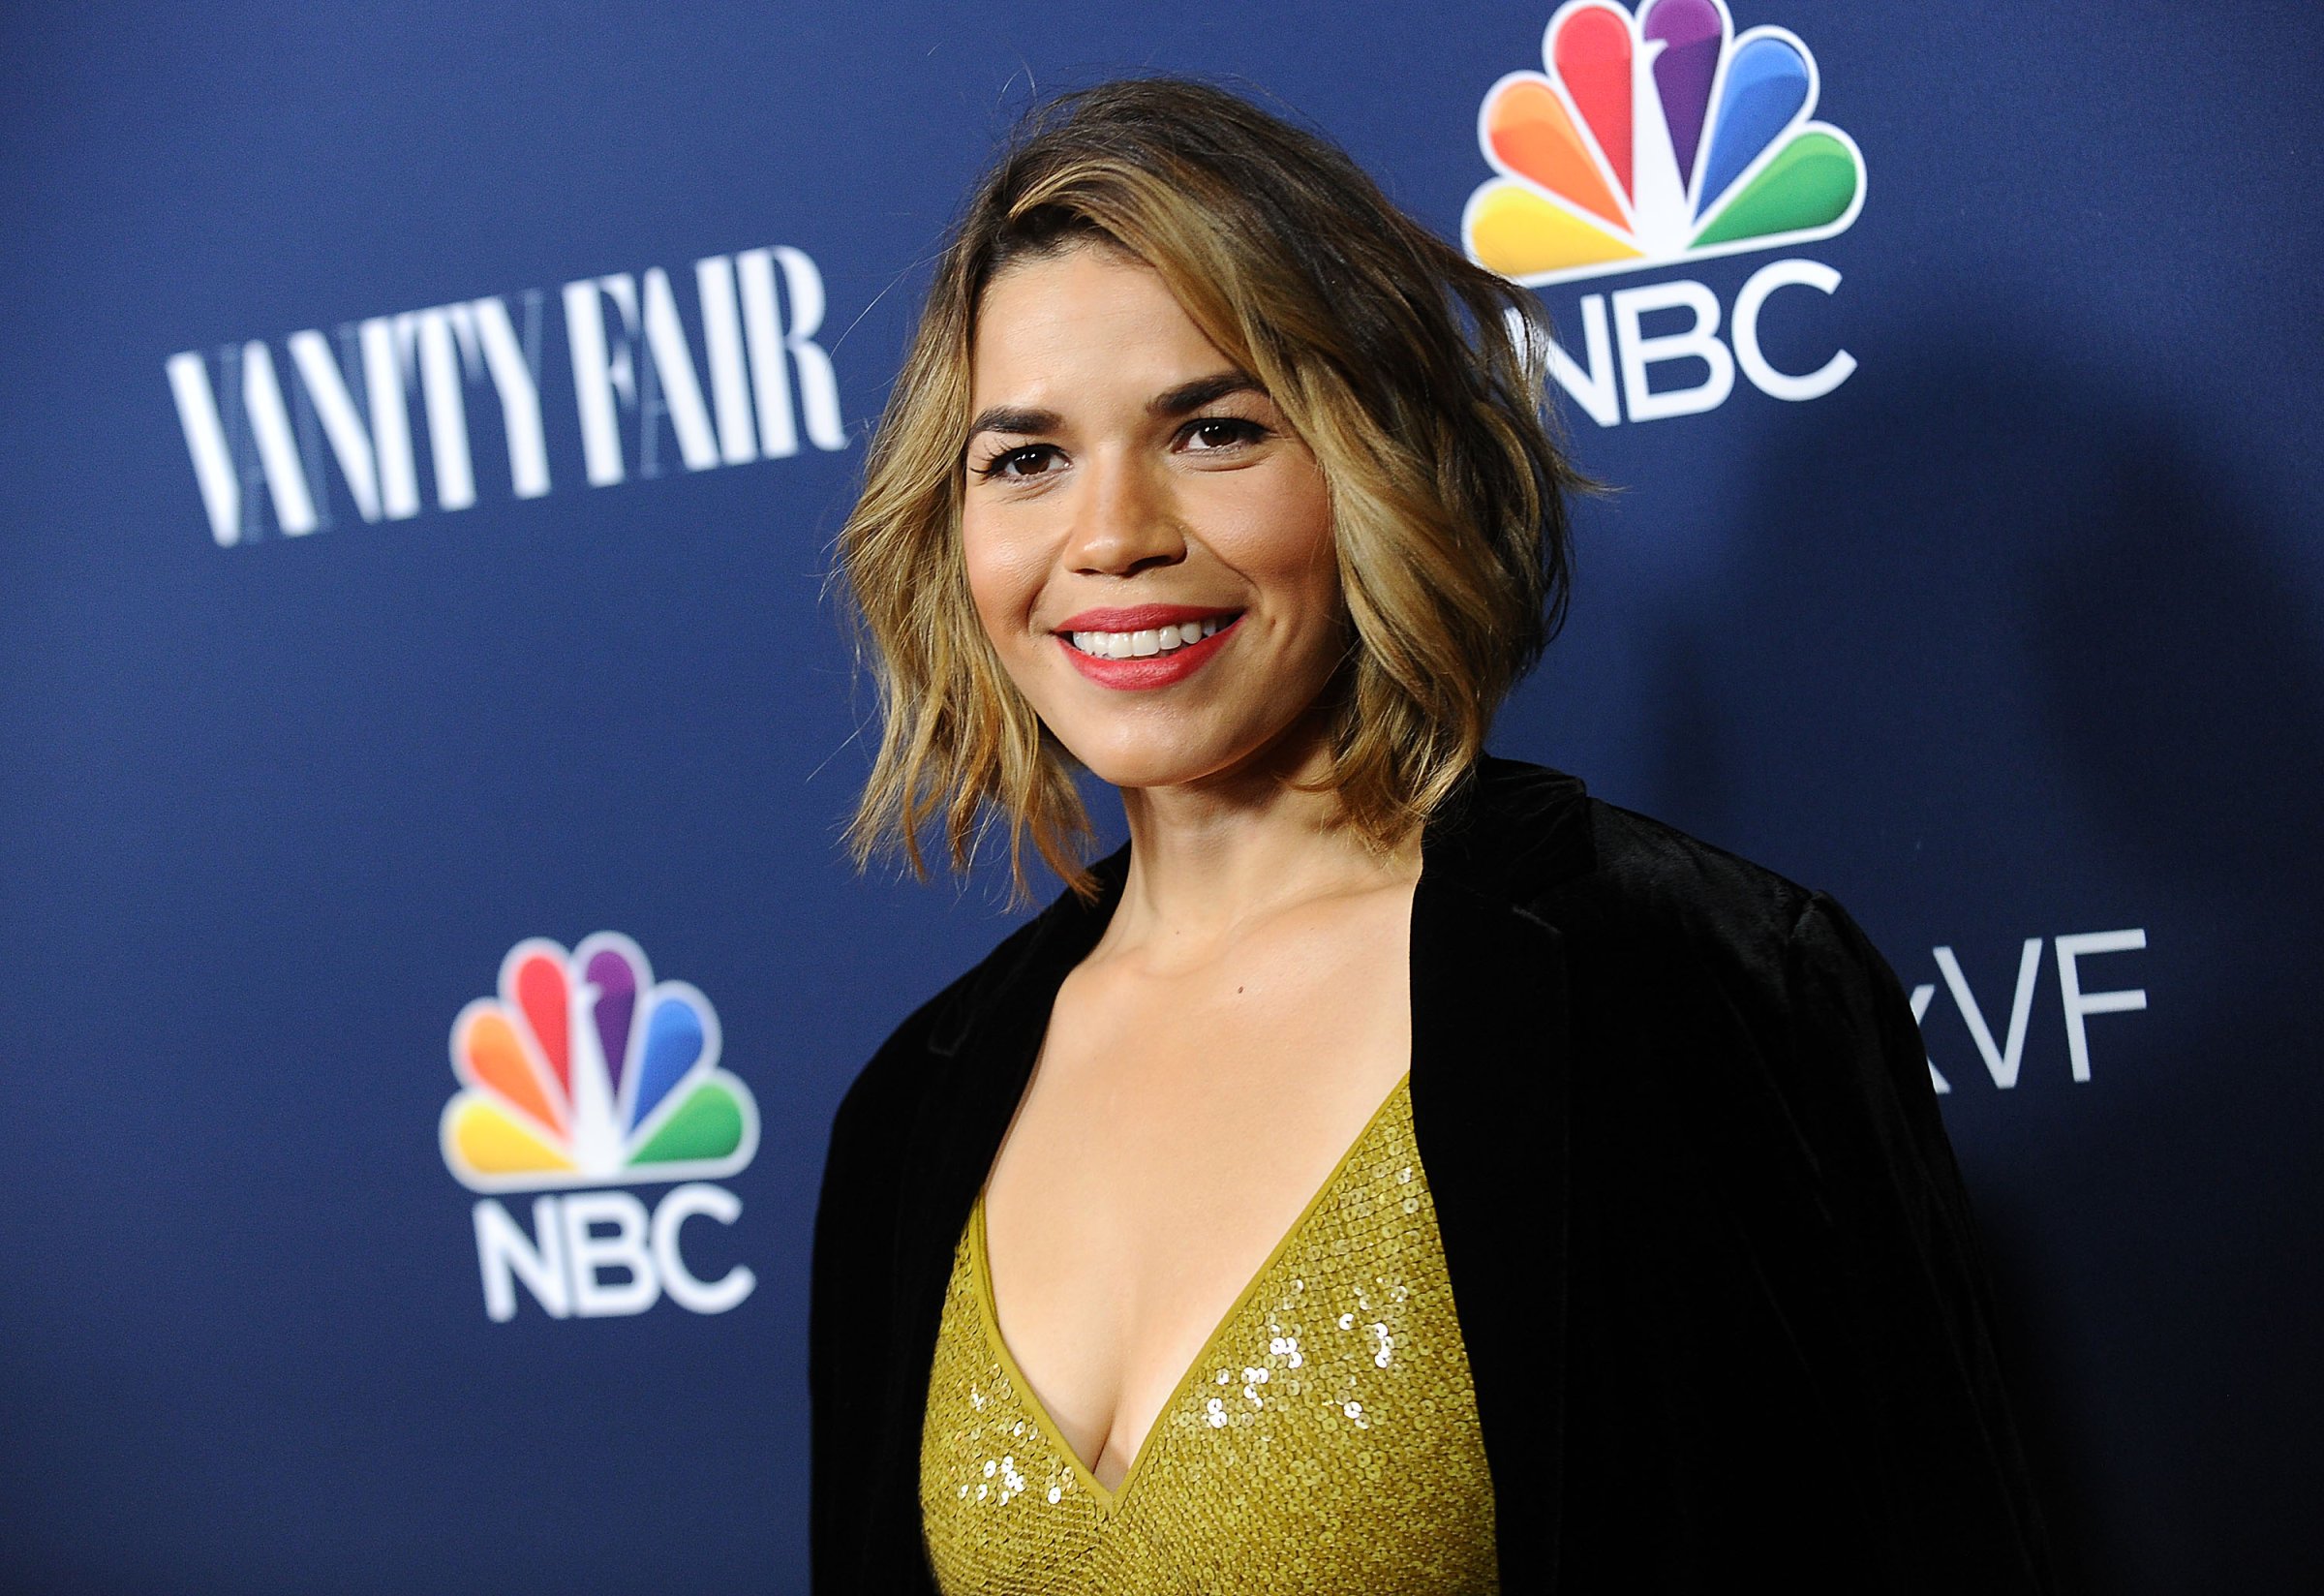 Actress America Ferrera attends the NBC and Vanity Fair toast to the 2016-2017 TV season at NeueHouse Hollywood on November 2, 2016 in Los Angeles, California.